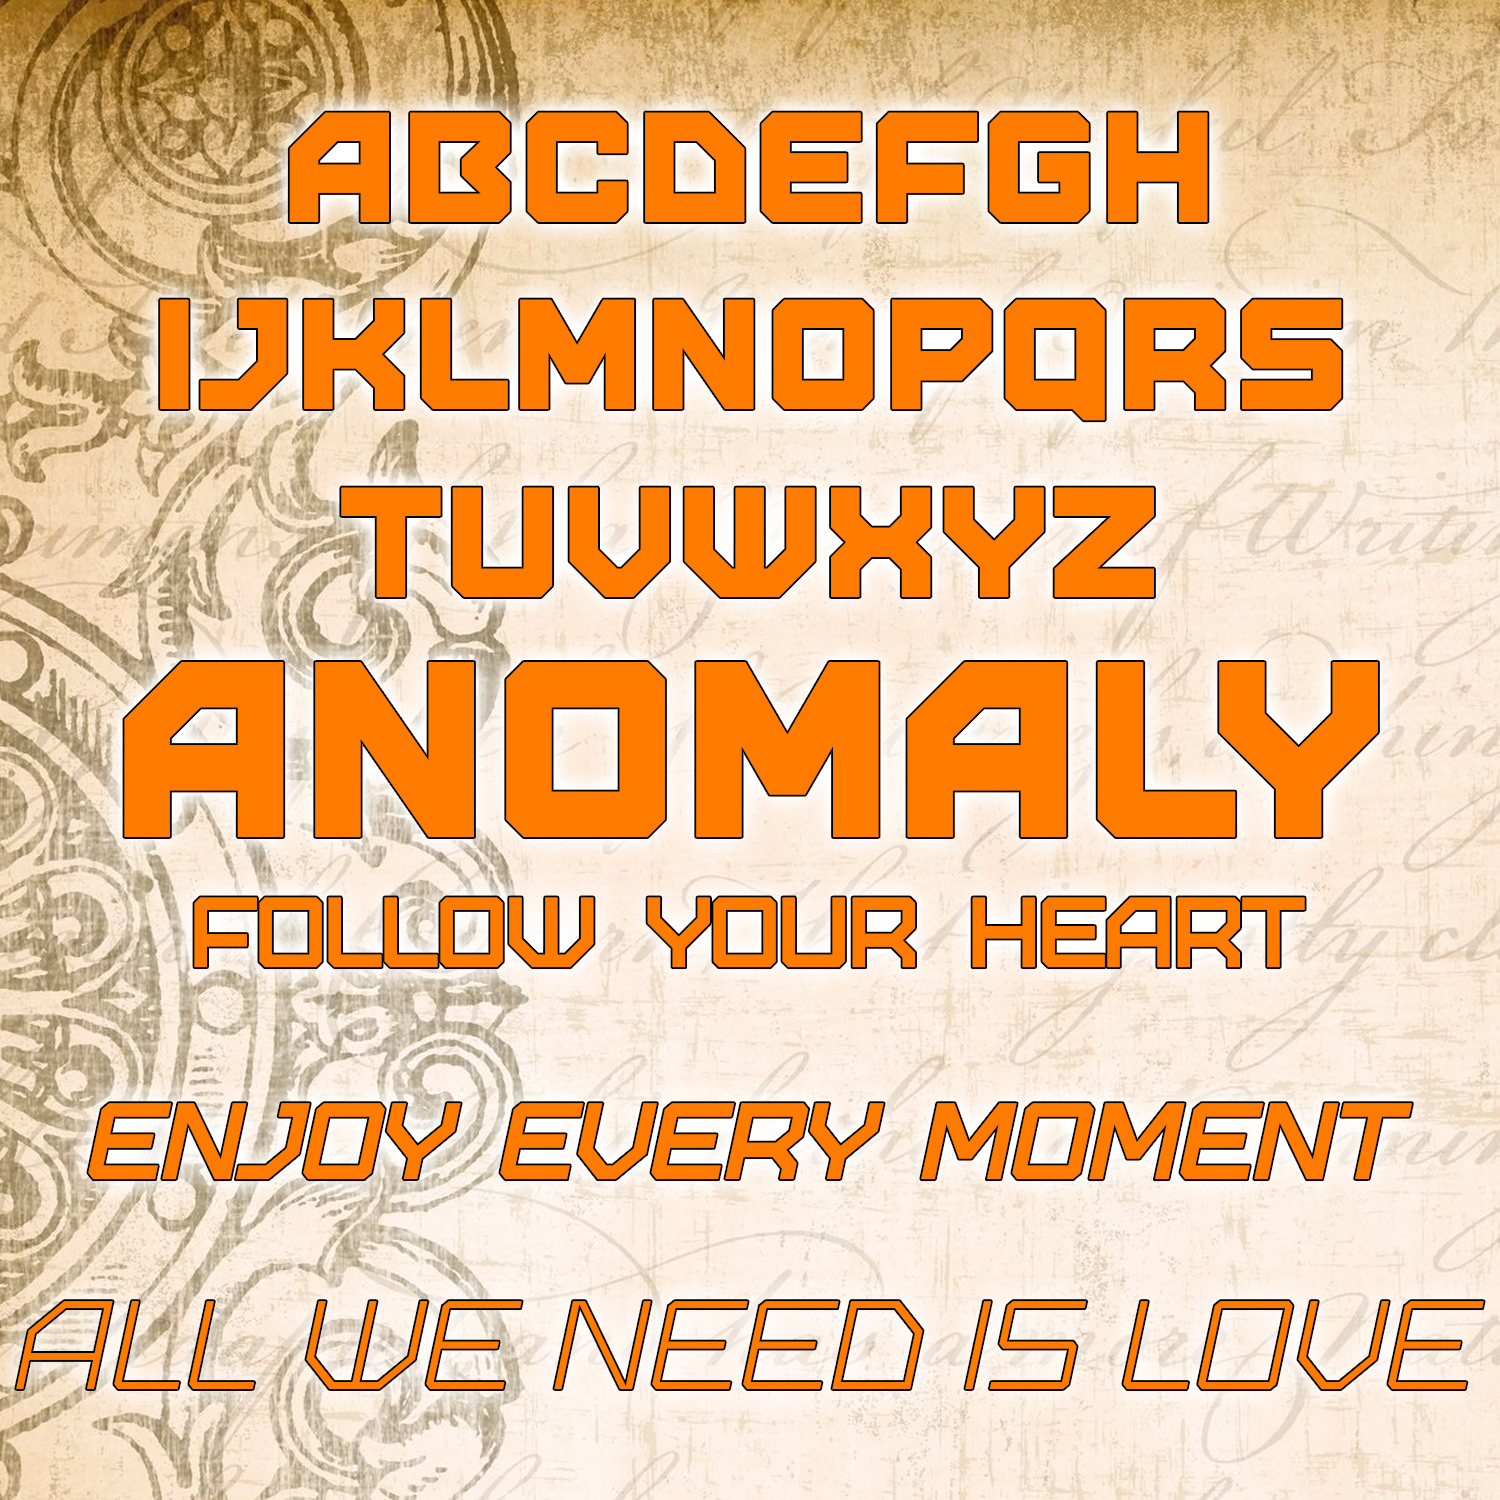 Orange font in the image with the inscription about love.